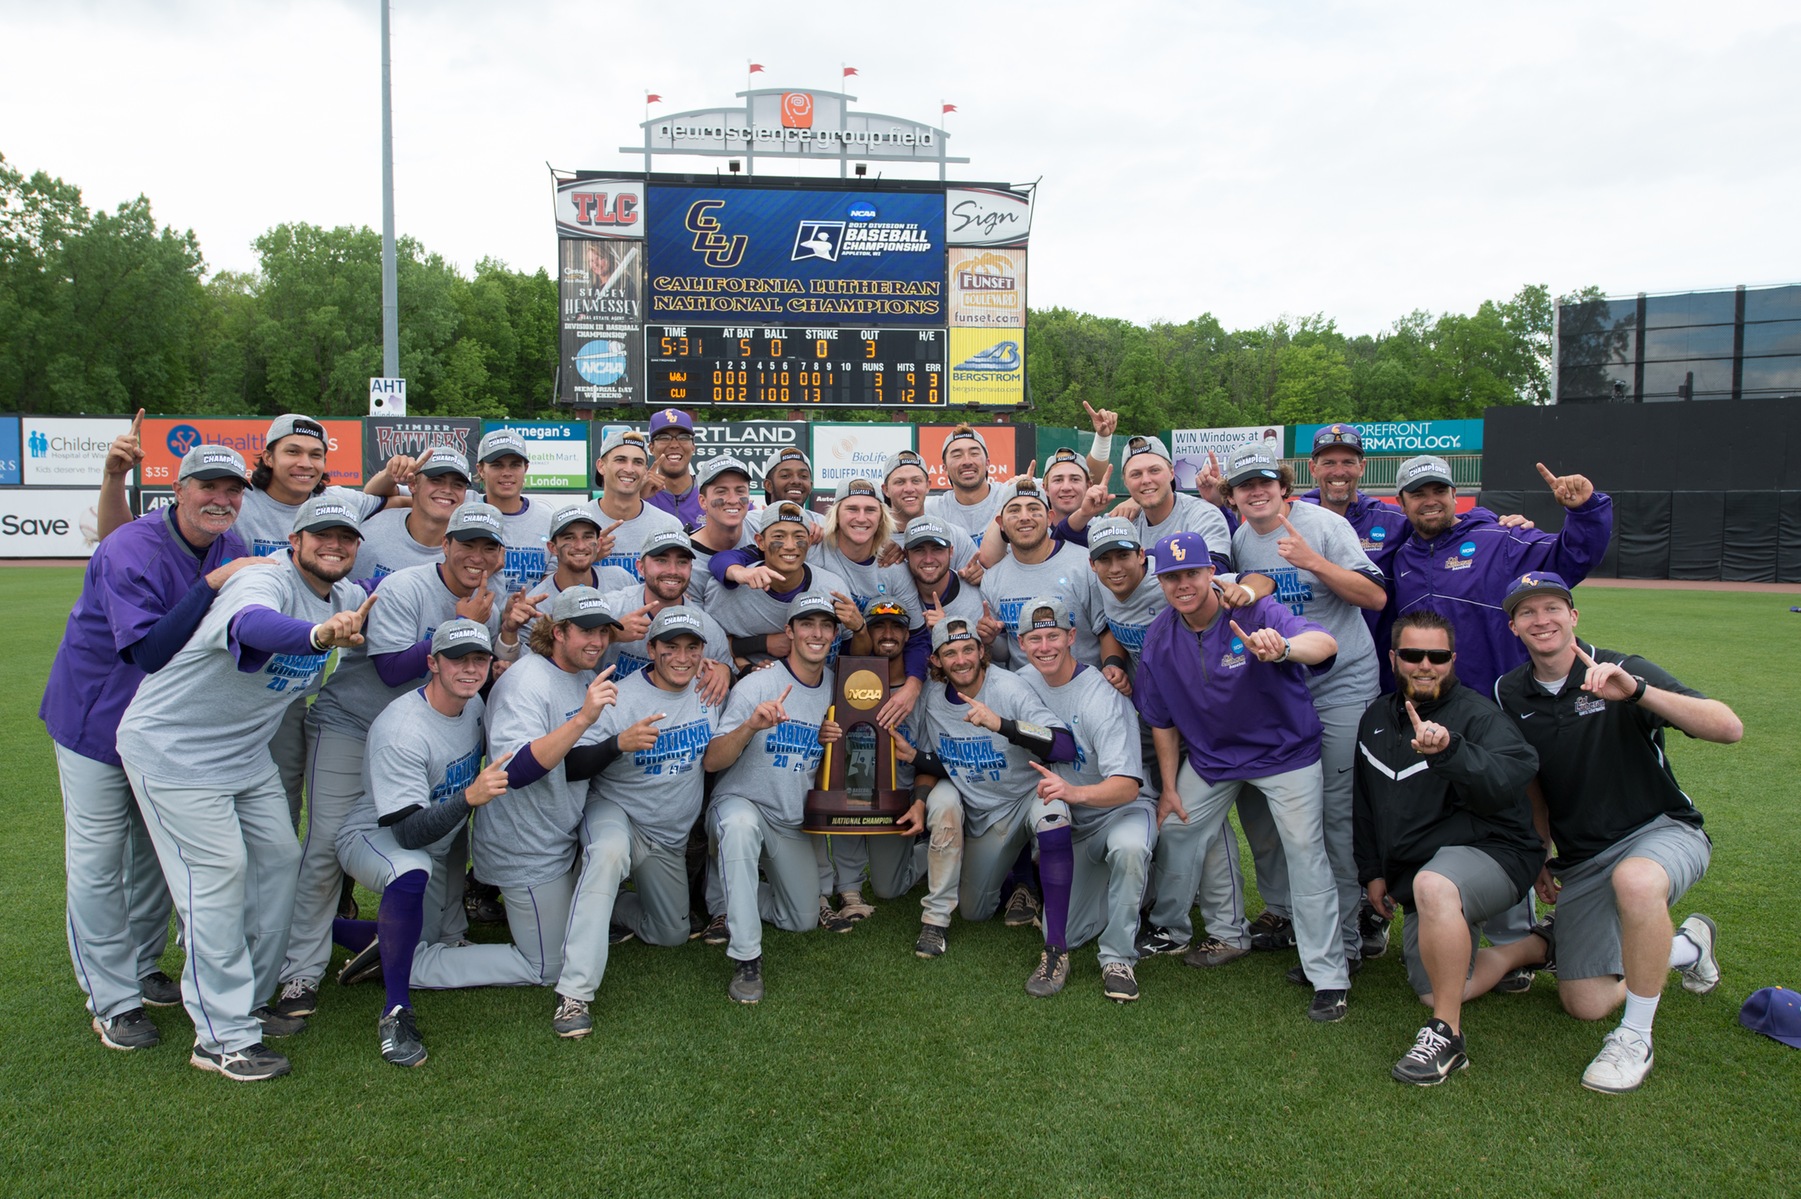 California Lutheran University captures its first NCAA Division III baseball title.